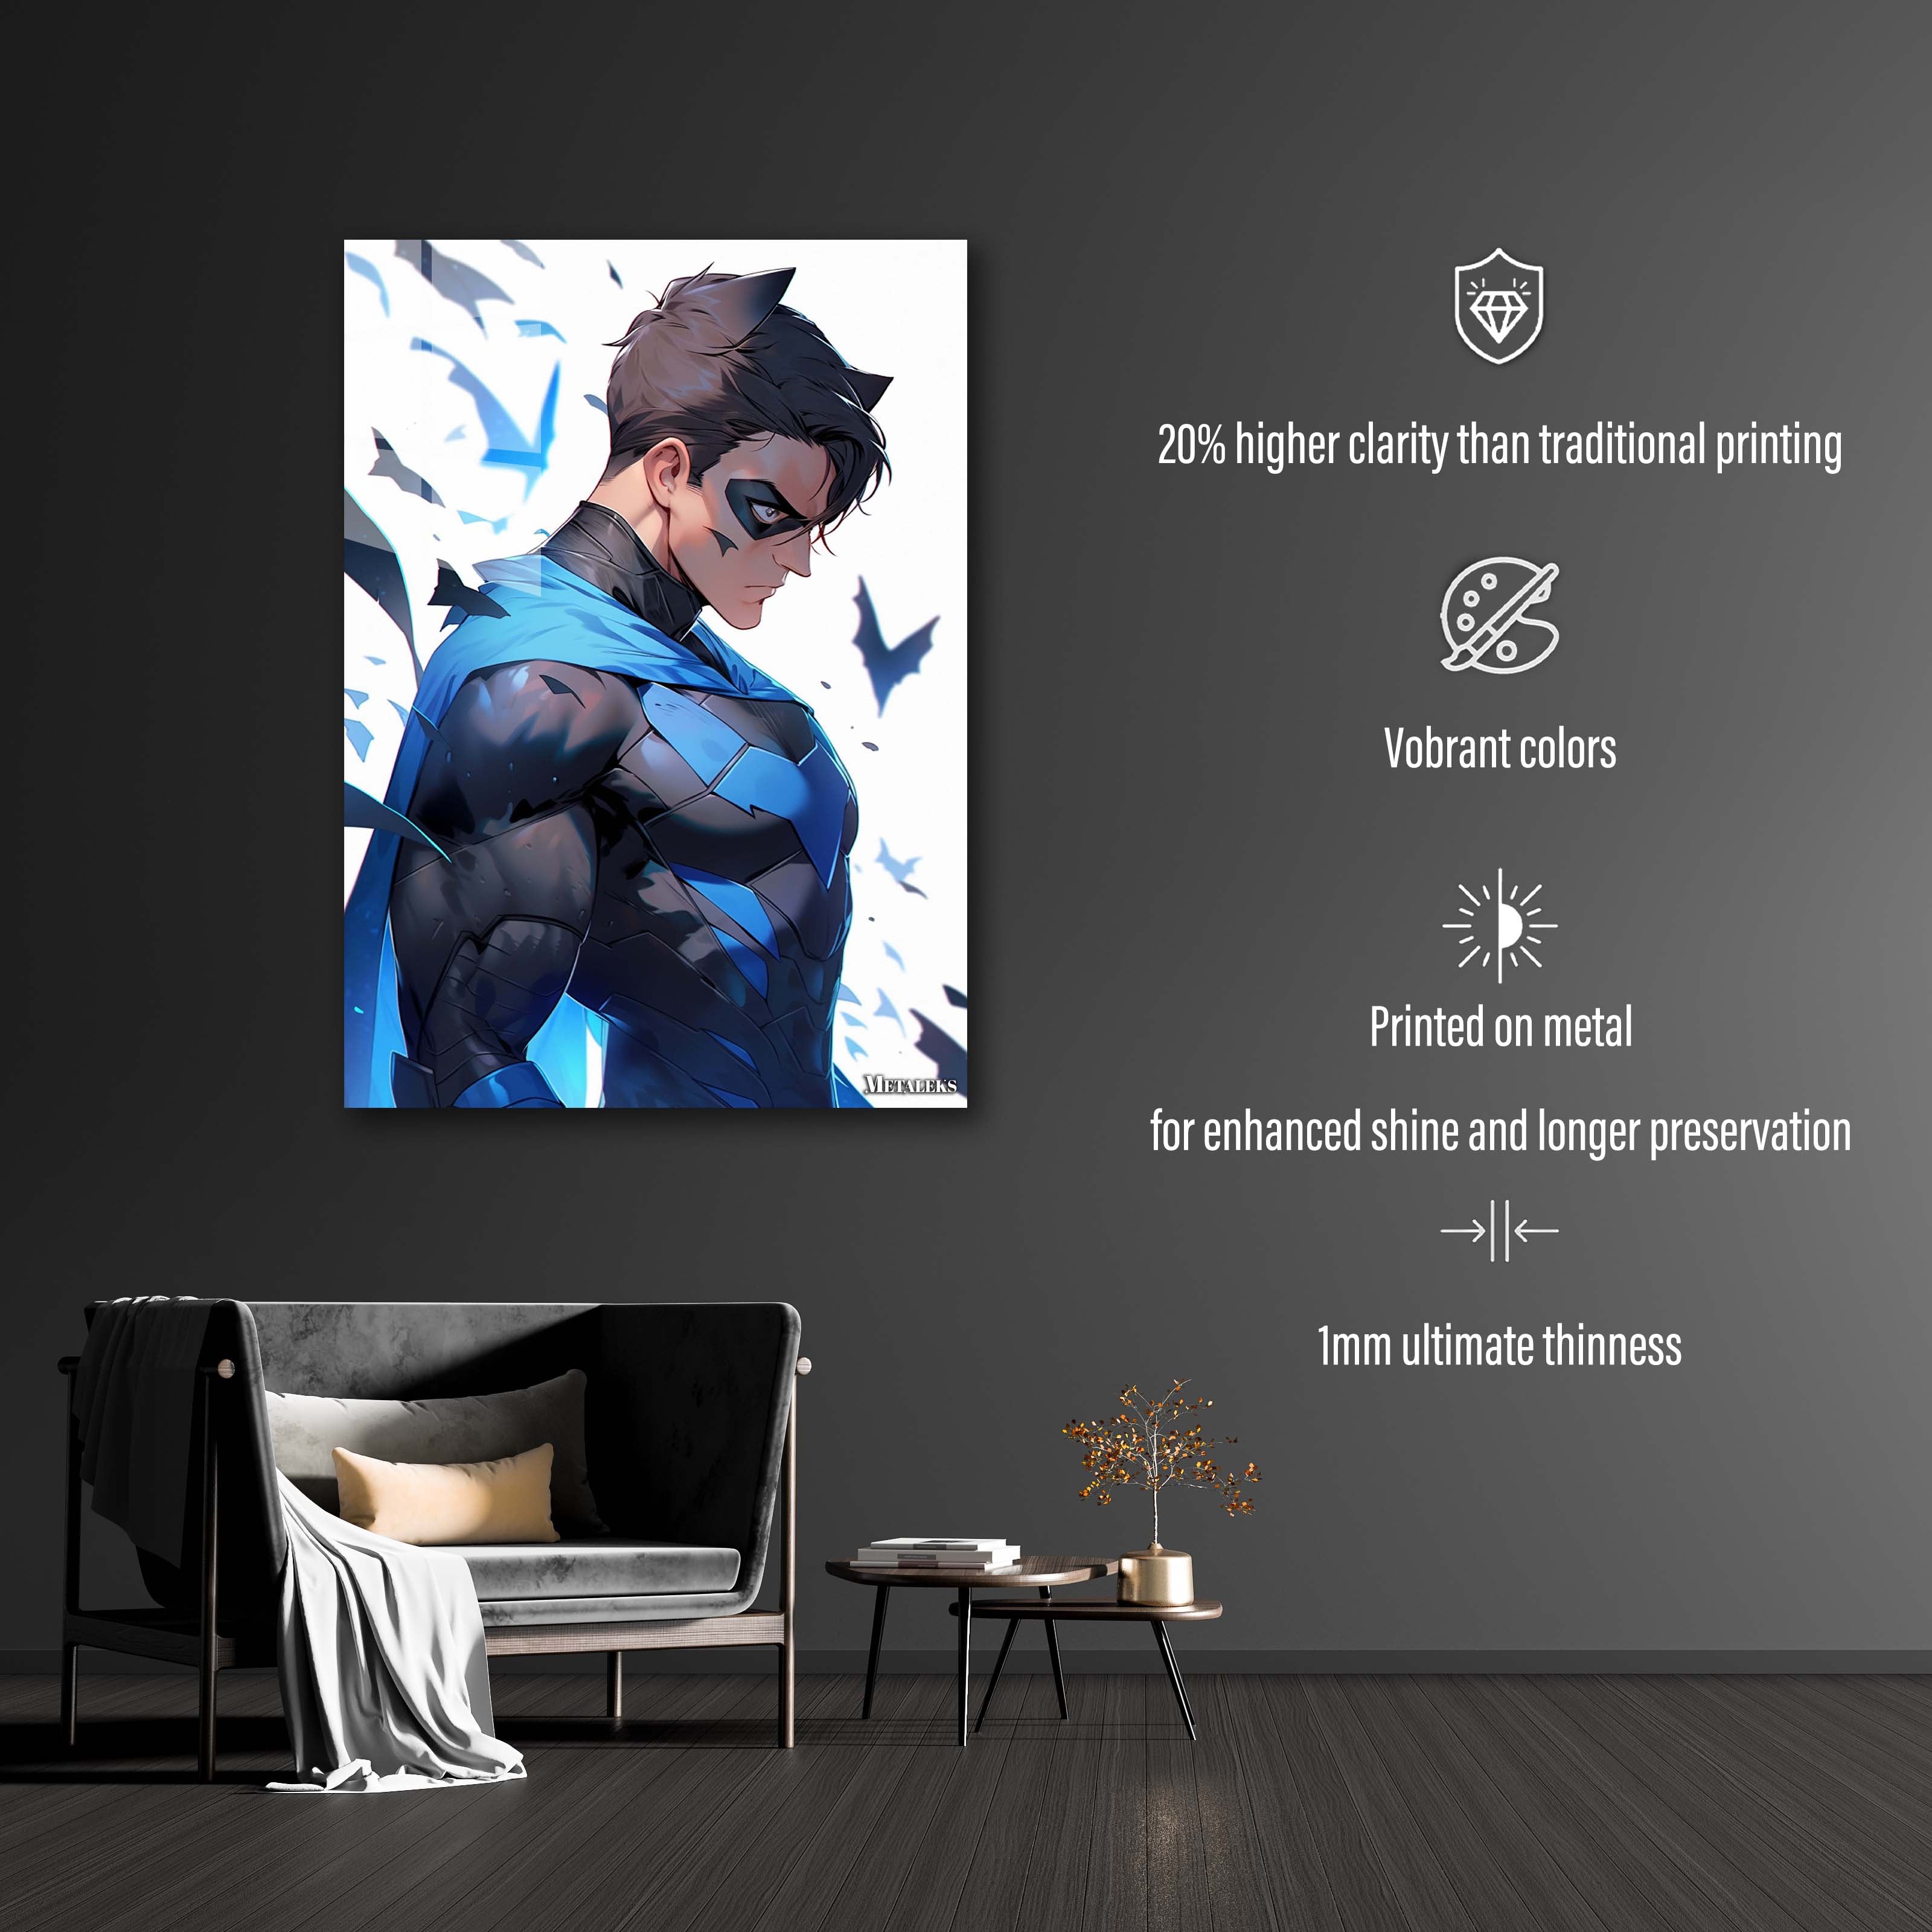 Acrobat's Ascent_ Nightwing's Aerial Acrobatics in Gotham-designed by @theanimecrossover